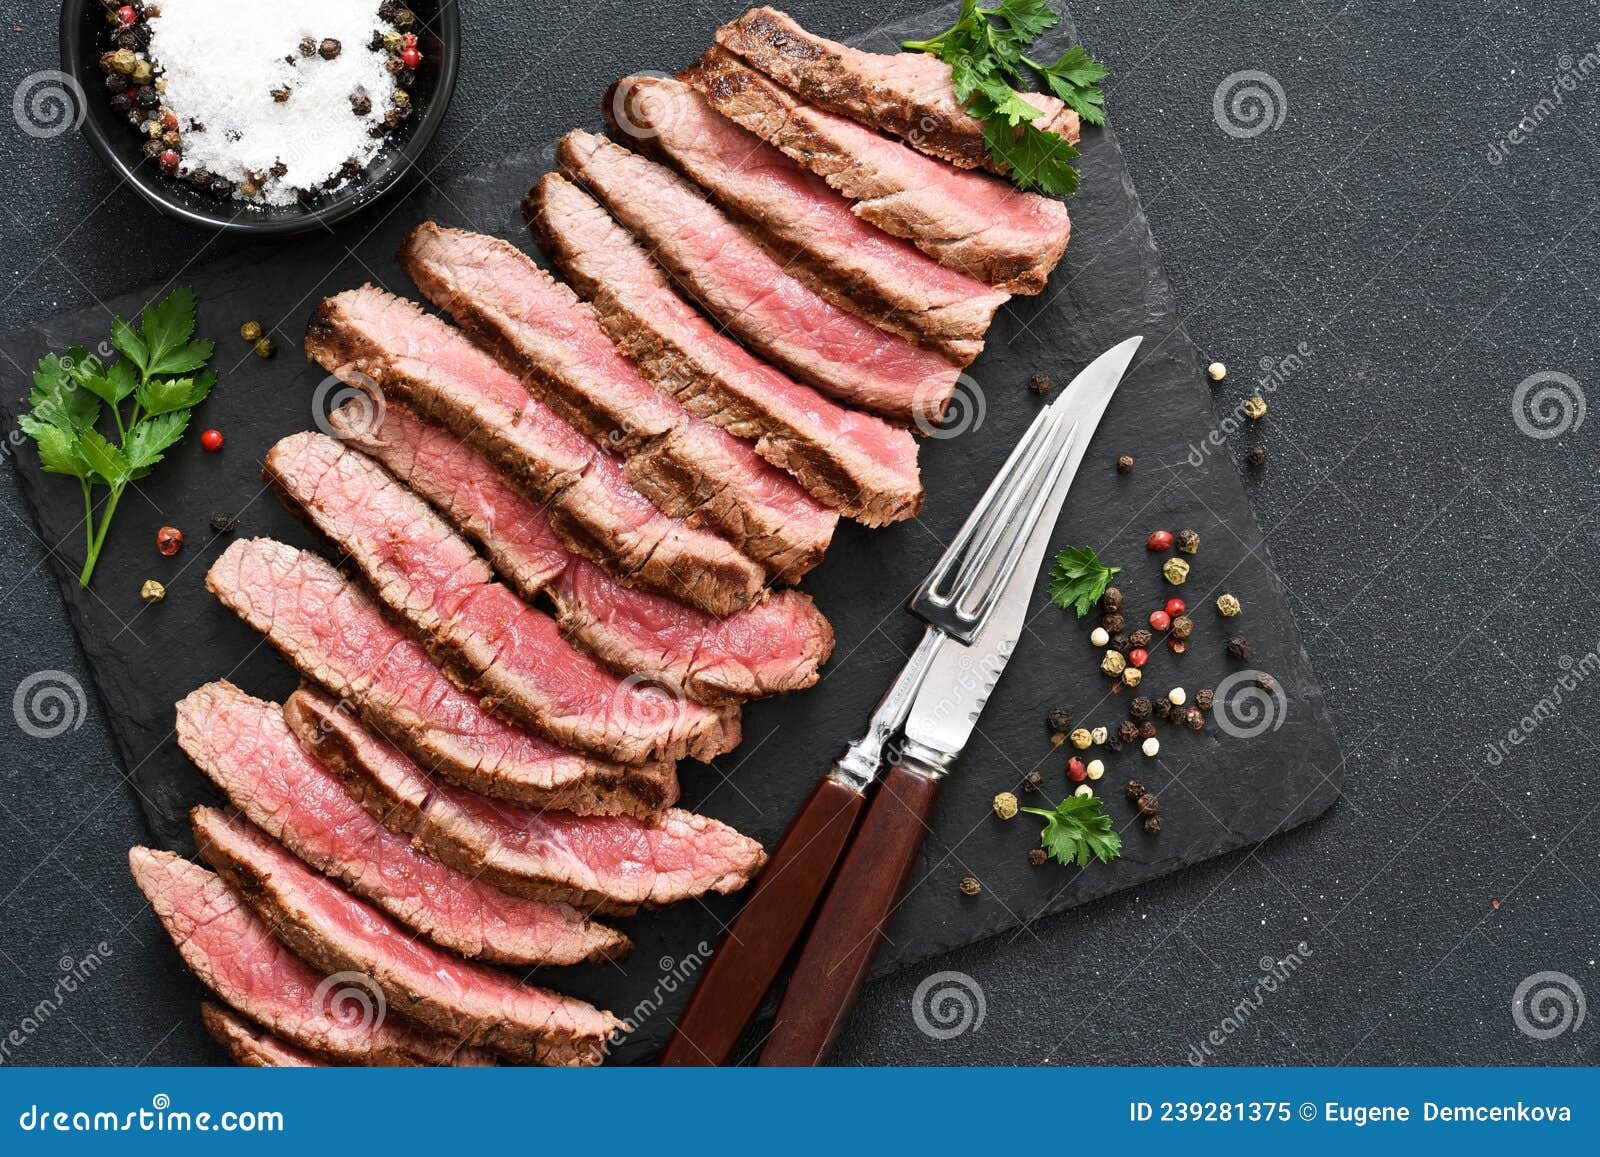 medium meat. grilled steak with provencal herbs on a stone board